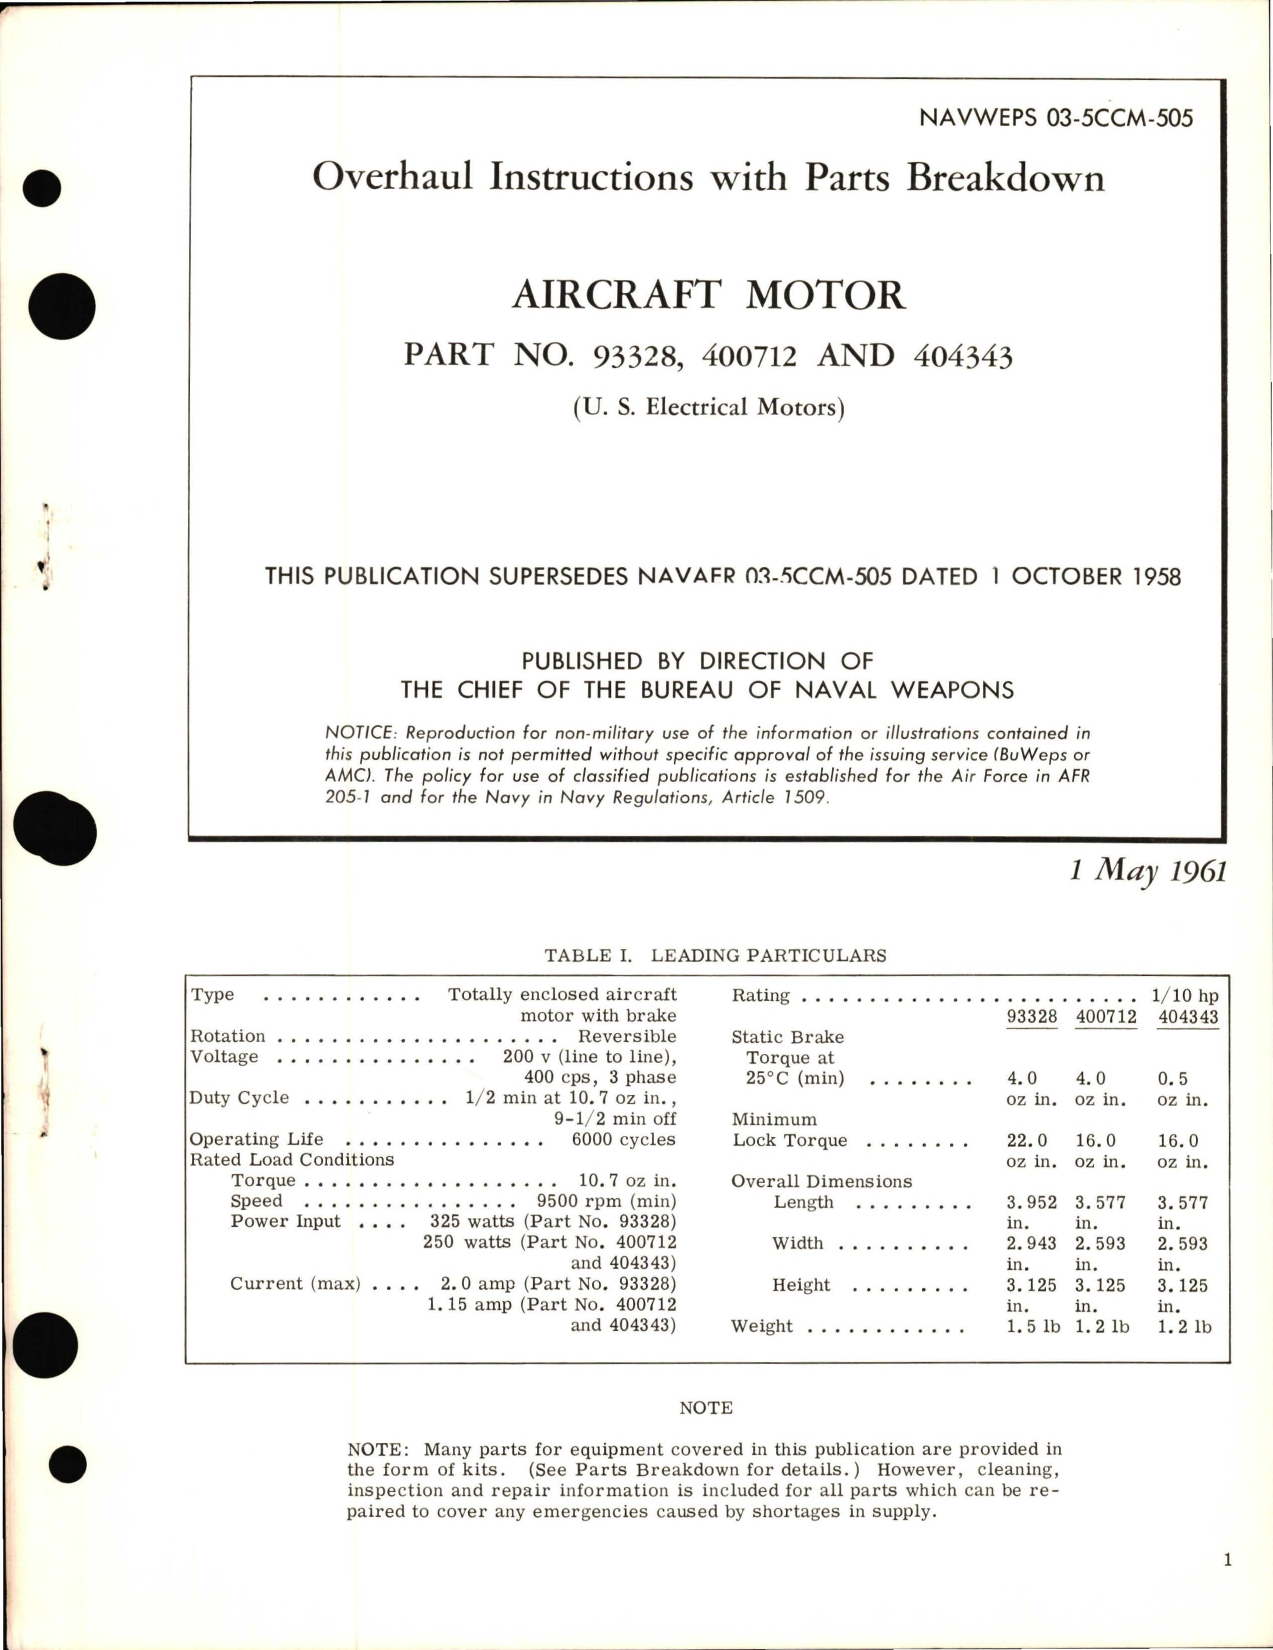 Sample page 1 from AirCorps Library document: Overhaul Instructions with Parts Breakdown for  Aircraft Motor - Part 93328, 400712 and 404343